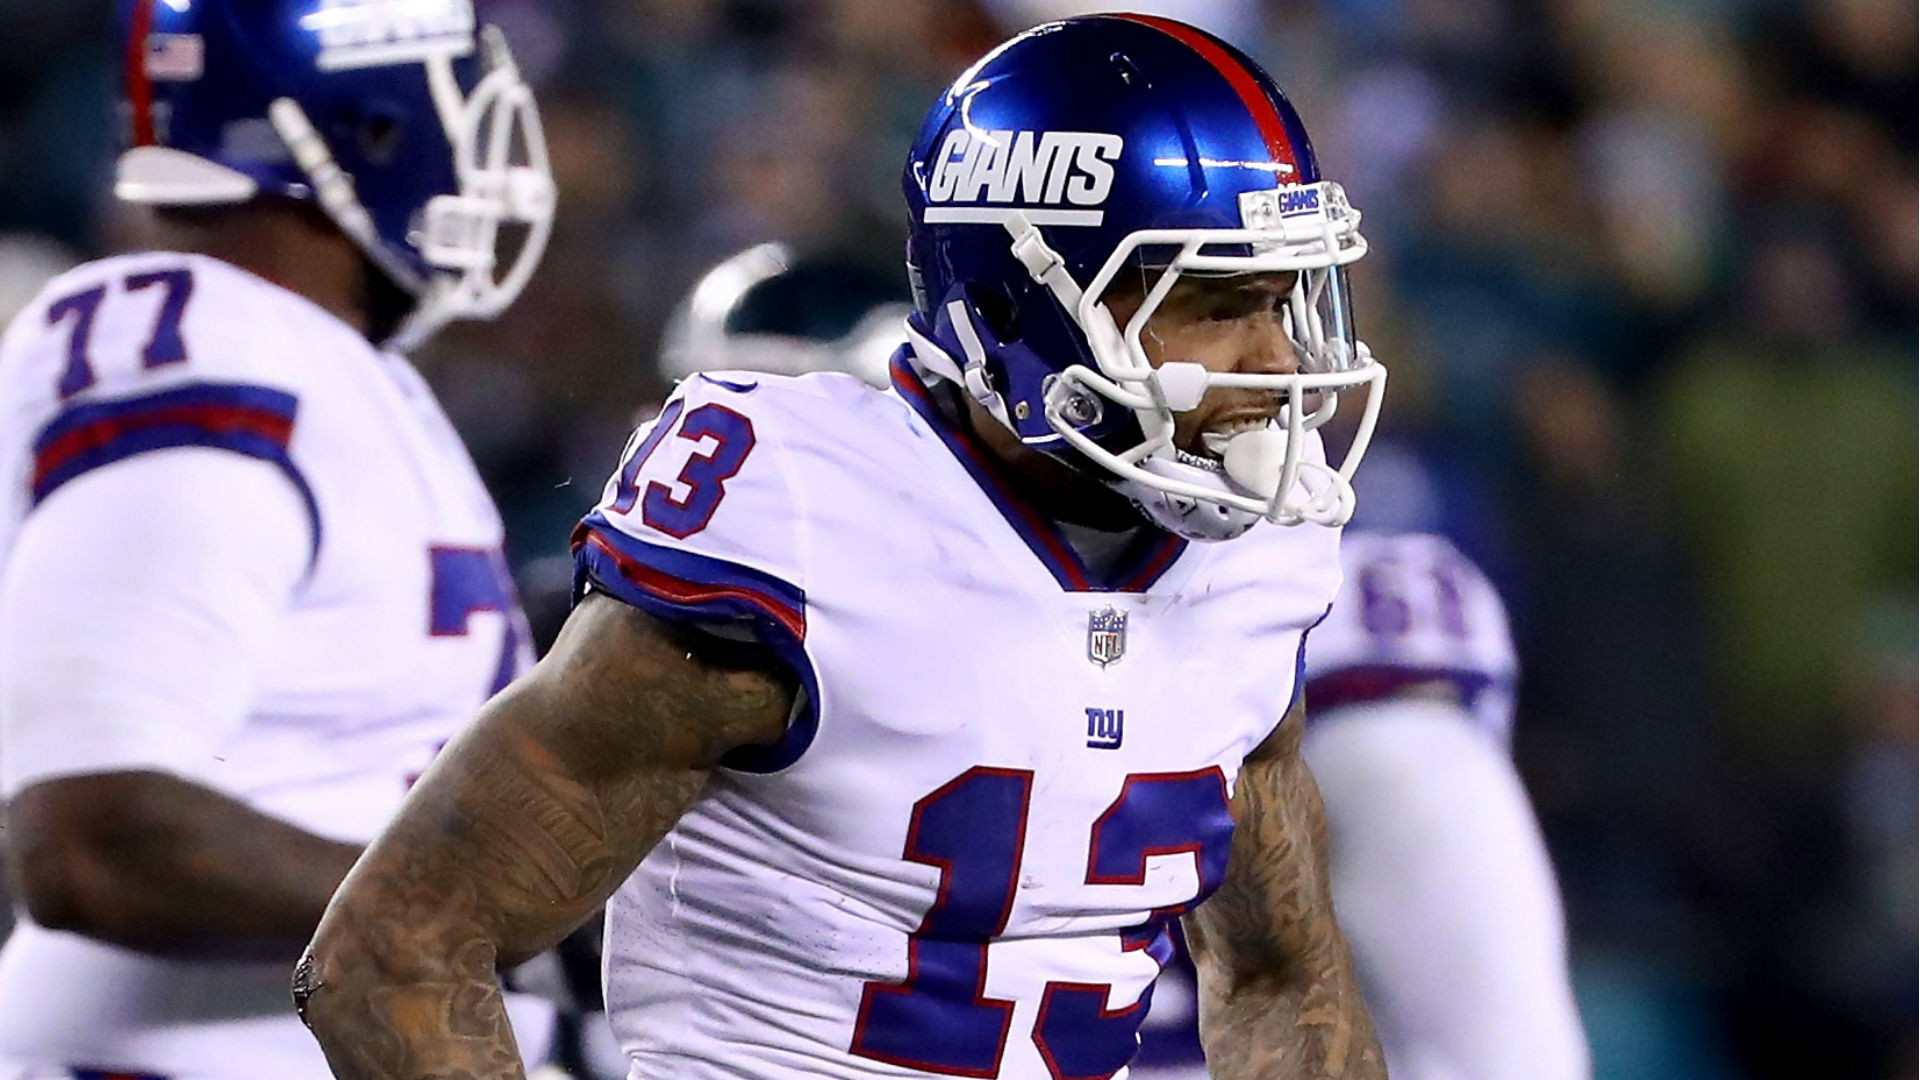 1920x1080 Odell beckham jr caught 'growling to himself' after giants' loss